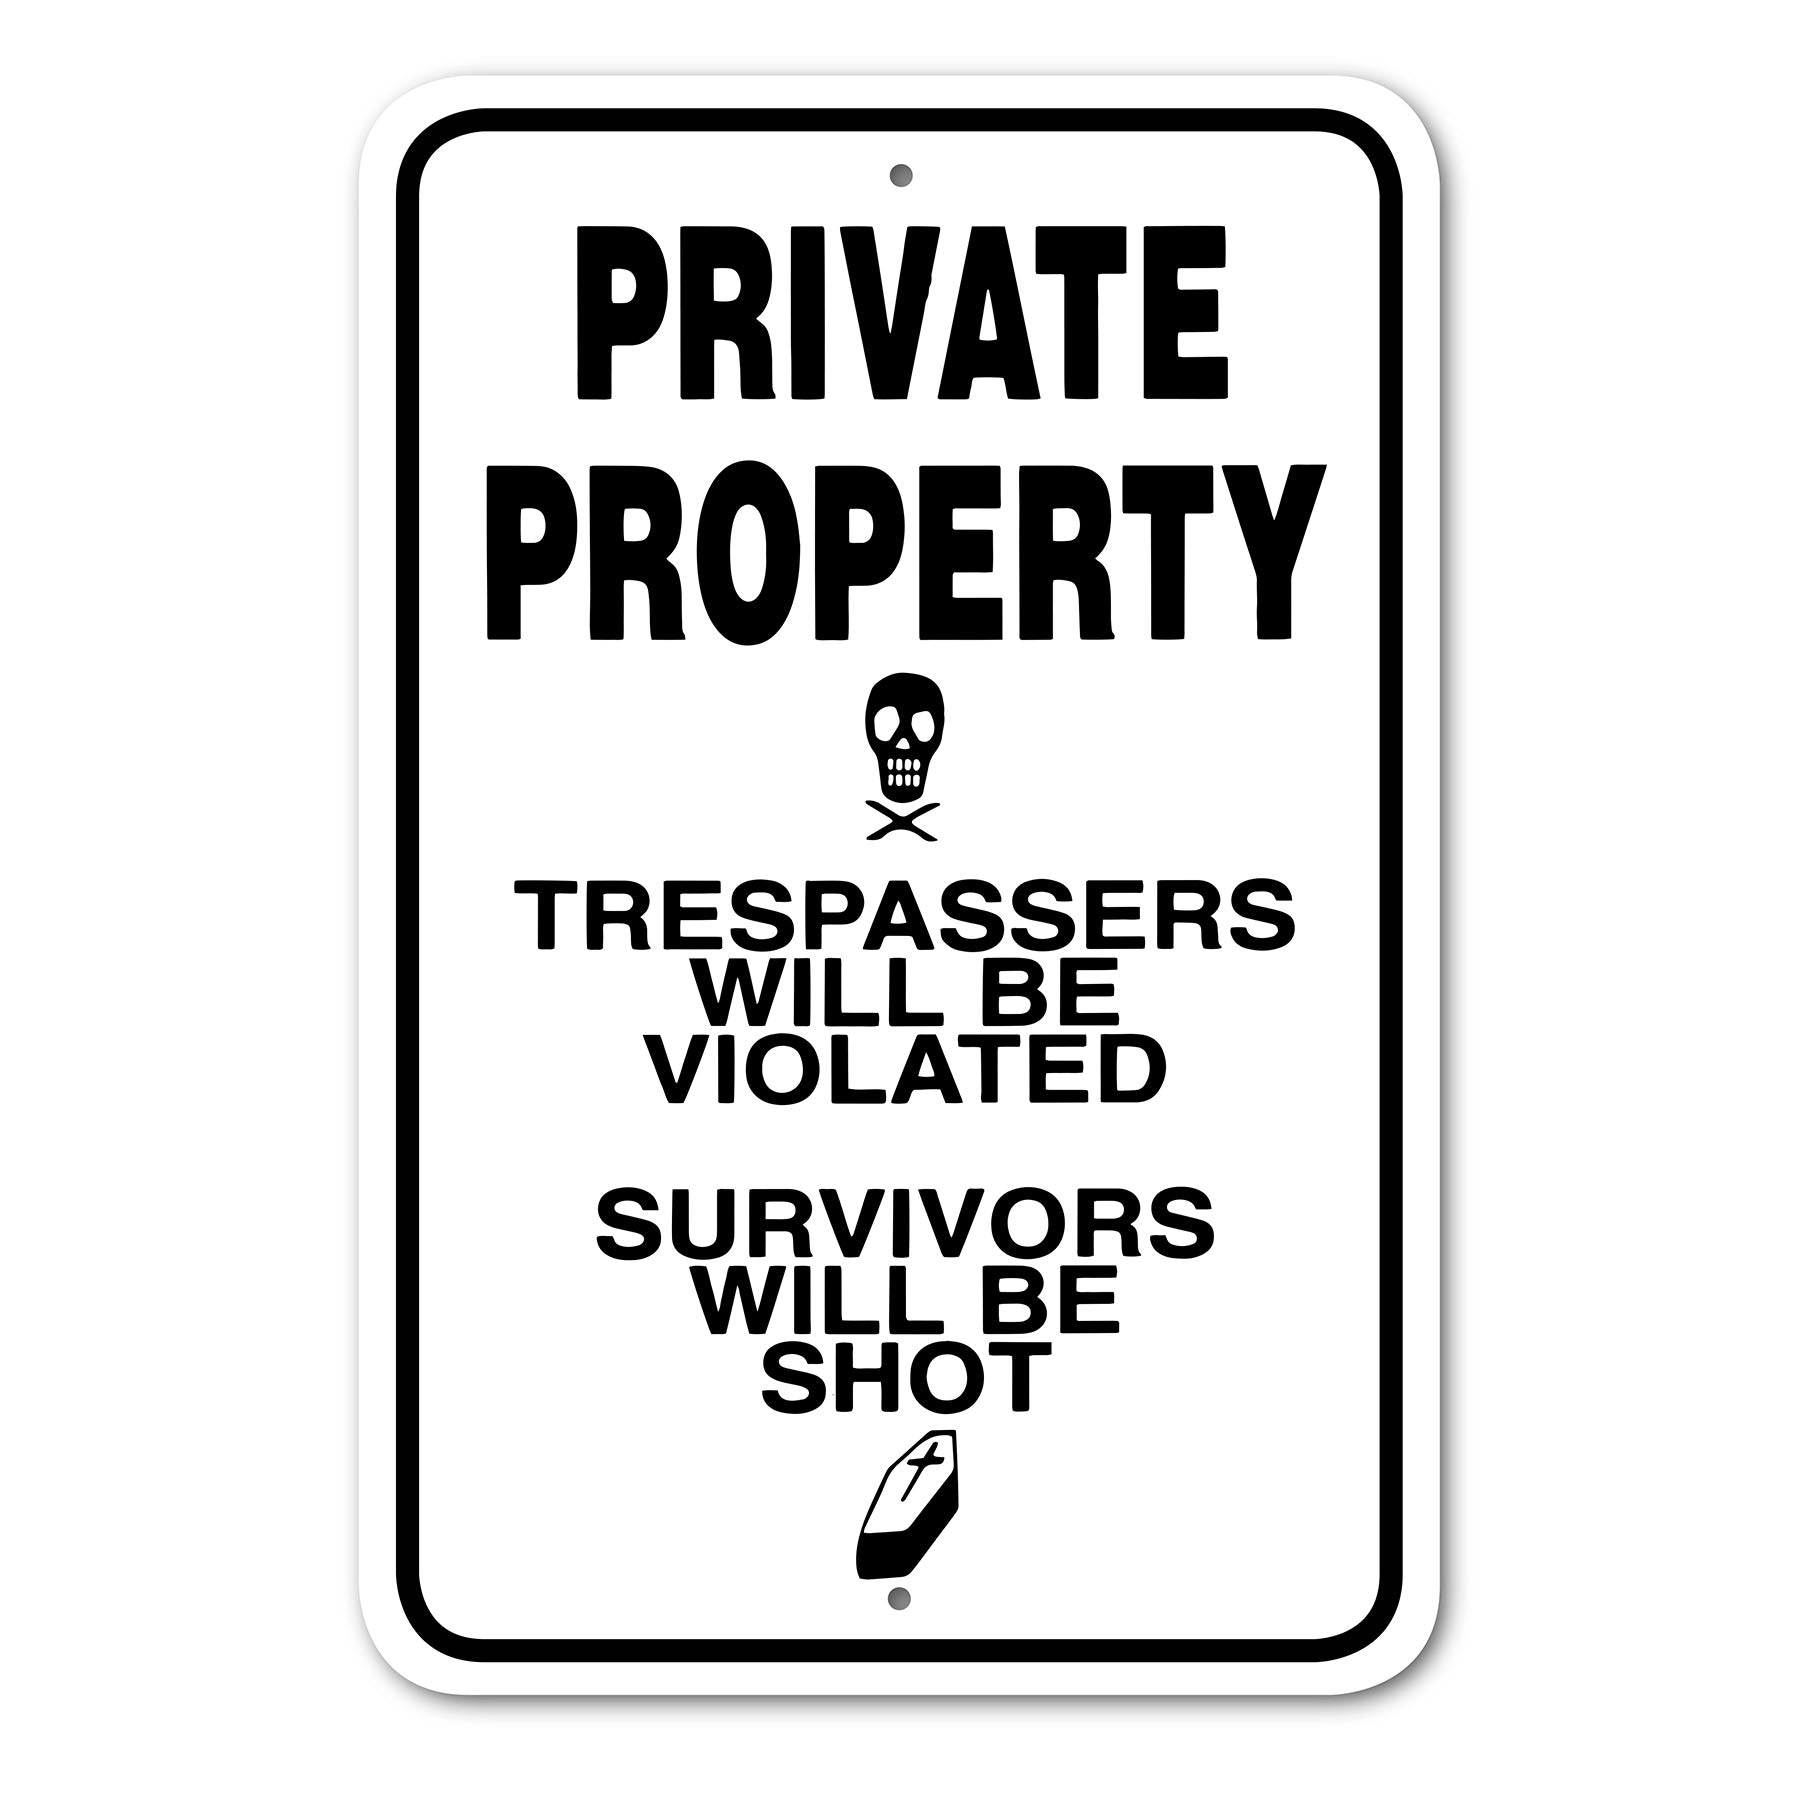 private property trespassers will be violated 12x18 146709 main